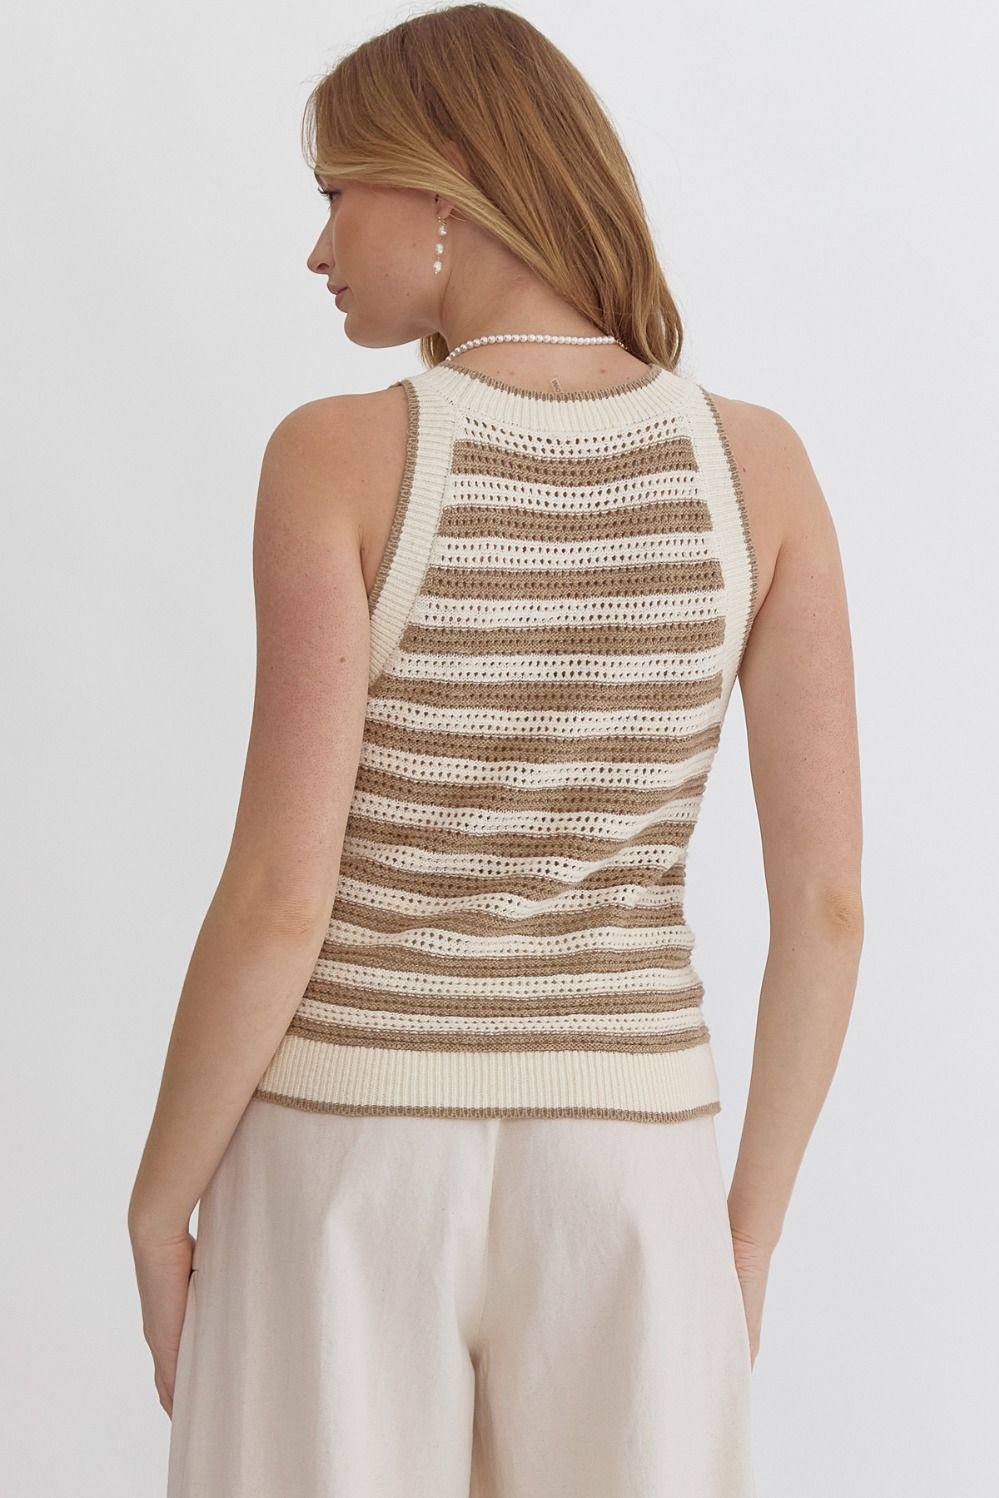 Entro | Striped Knit Halter Top | Sweetest Stitch Shop Summer Tops